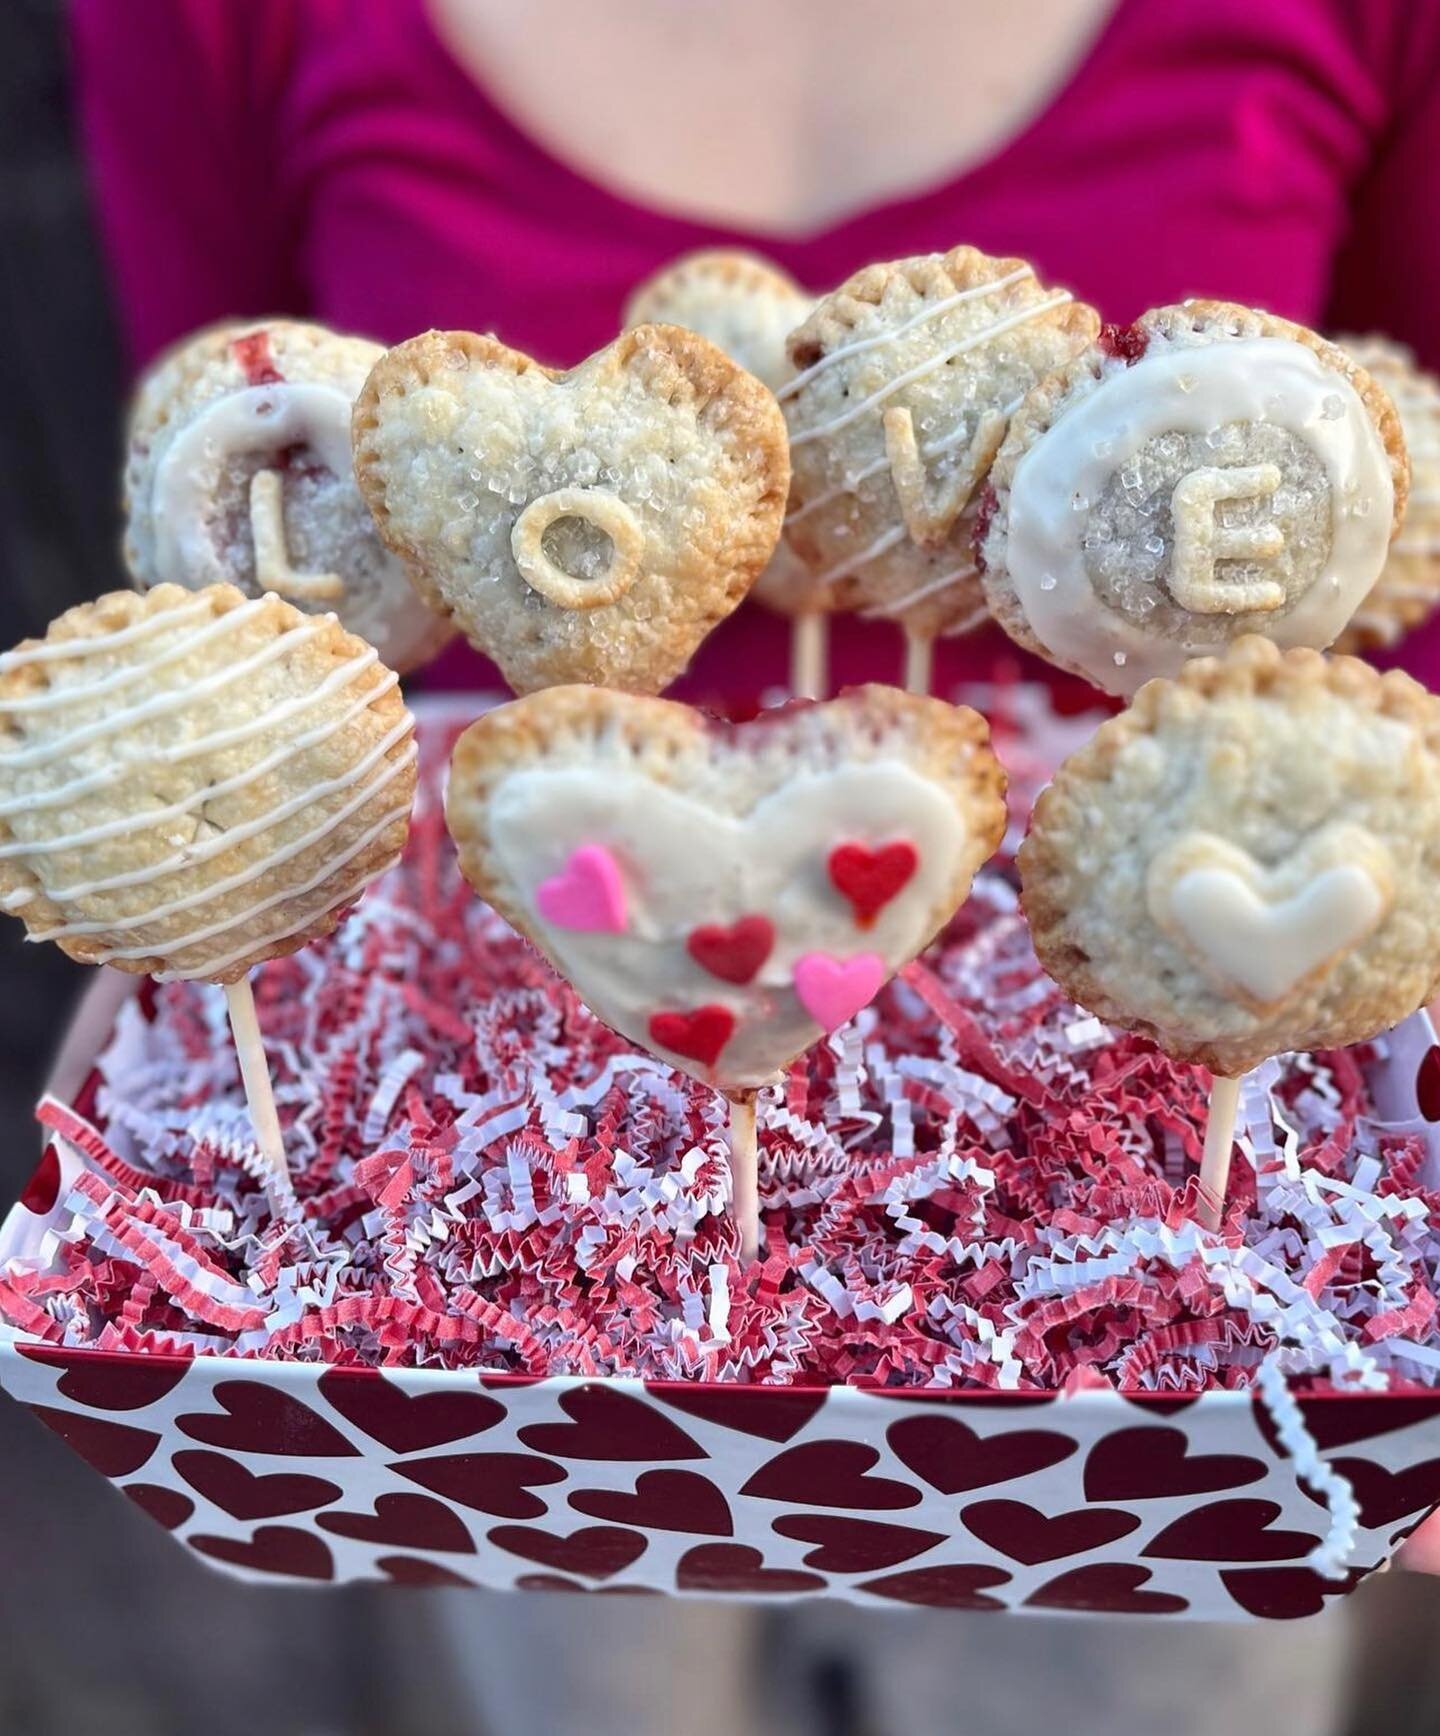 Homemade pie on a stick?! 🥧 YES, please!

Get your special someones the cutest treat this valentine&rsquo;s day from @flakyapplepieco!!

Head to their bio to order. &hearts;️✨

#flakyapplepieco #pies #homemadepies #valentinesday #valentines #costame